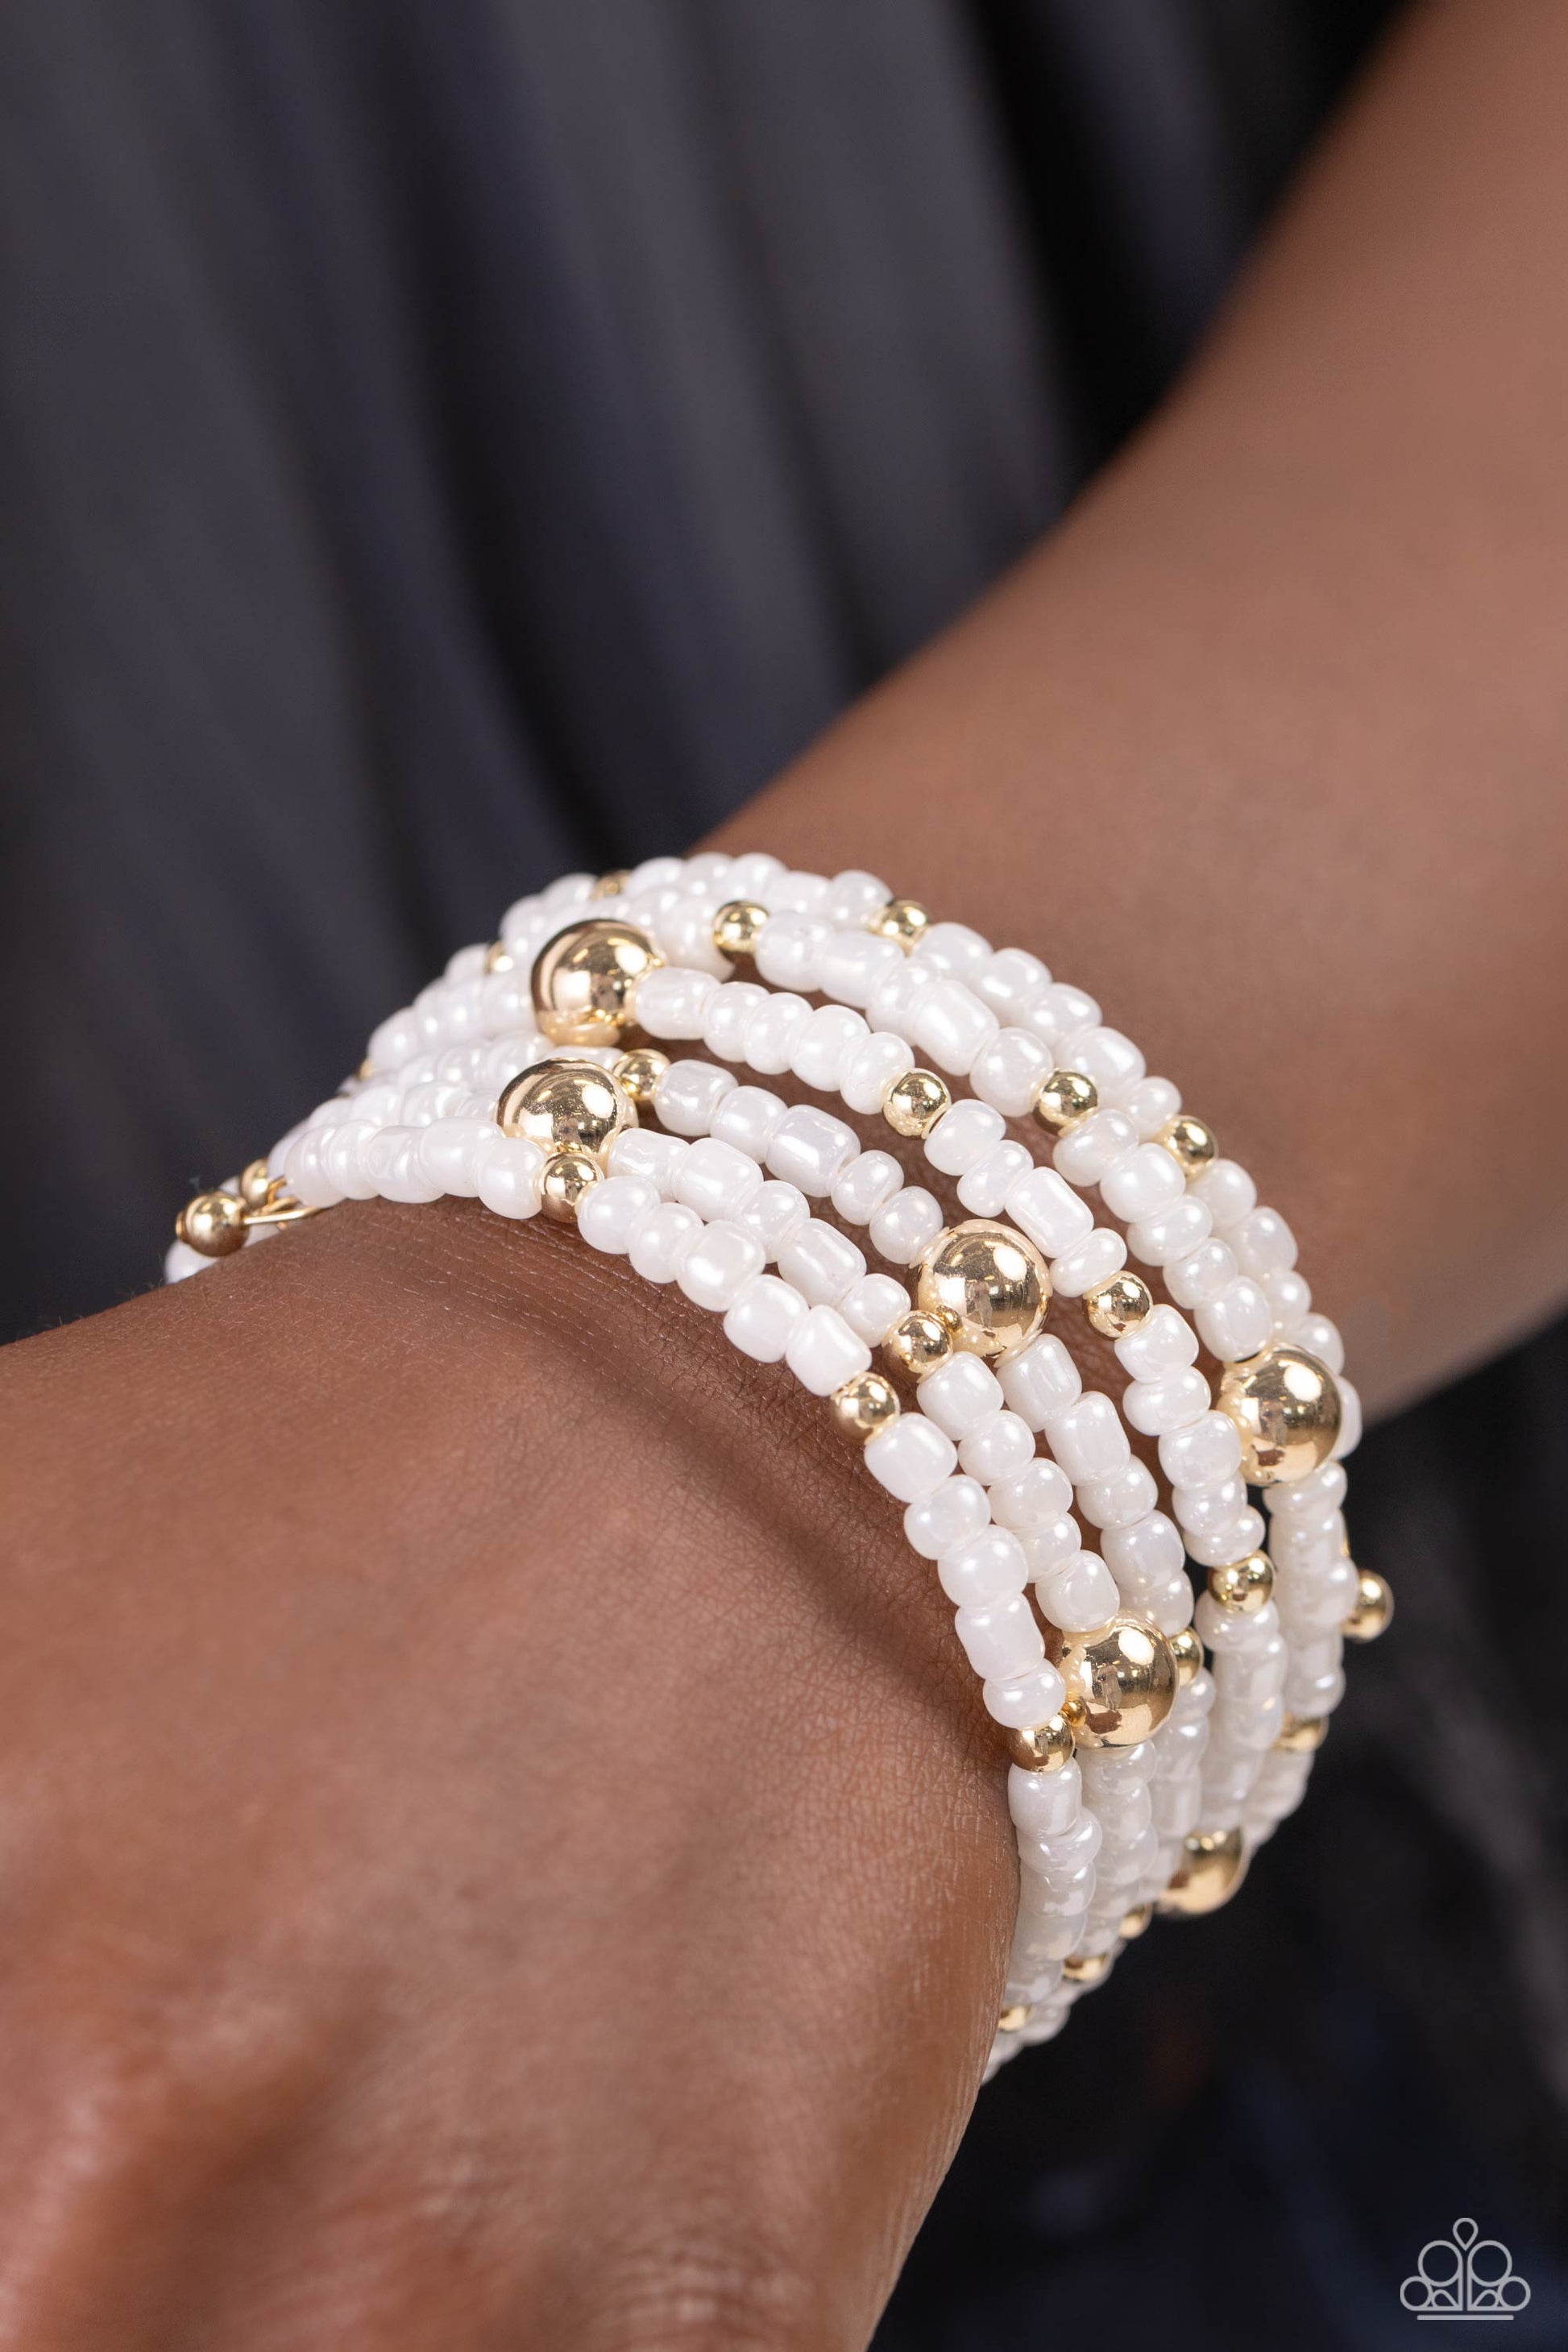 Refined Retrograde Gold Coil Bracelet - Paparazzi Accessories  Pearly white seed beads, and various-sized gold accents are threaded along a coiled wire, creating a refined infinity wrap-style bracelet around the wrist.  Sold as one individual bracelet.  P9RE-GDXX-401XX